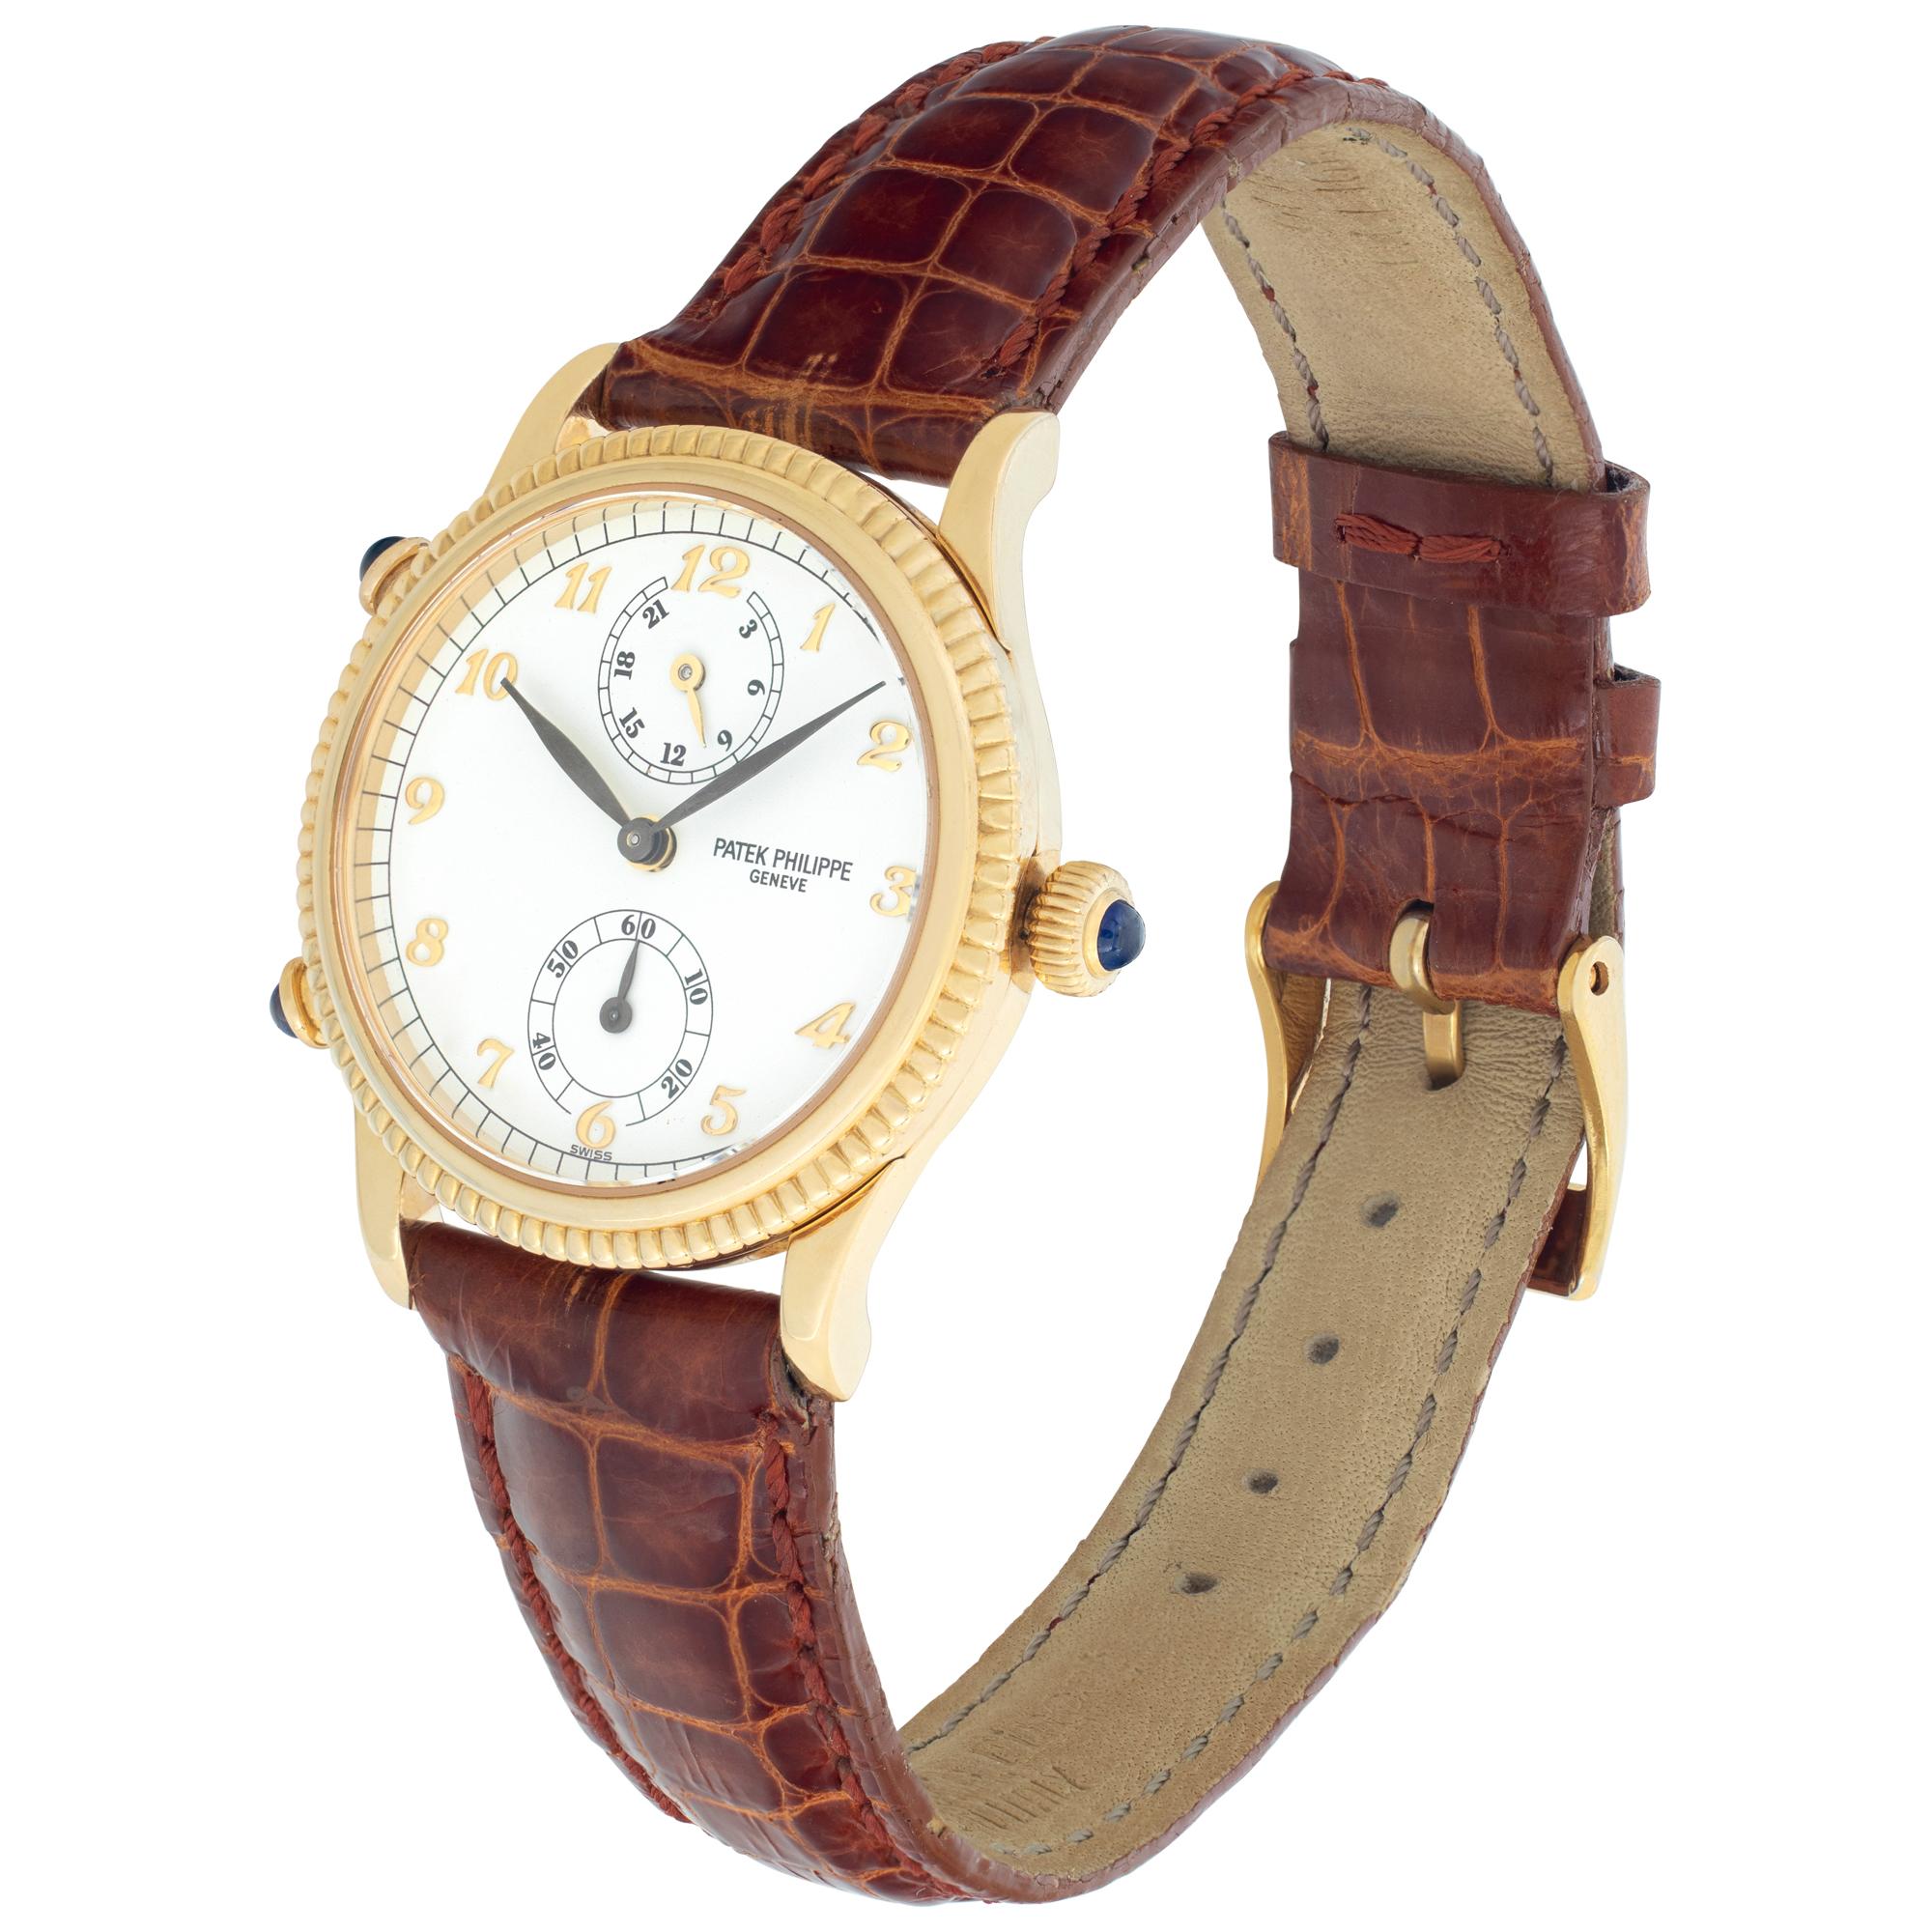 Patek Philippe Travel Time in 18k yellow gold a brown crocodile strap with 18k PP tang buckle. Manual wind 18 jewel movement with dual time zone, 24 hour indicator and sub-seconds. 29.5 mm case size. Ref 4864j. Fine Pre-owned Patek Philippe Watch.

